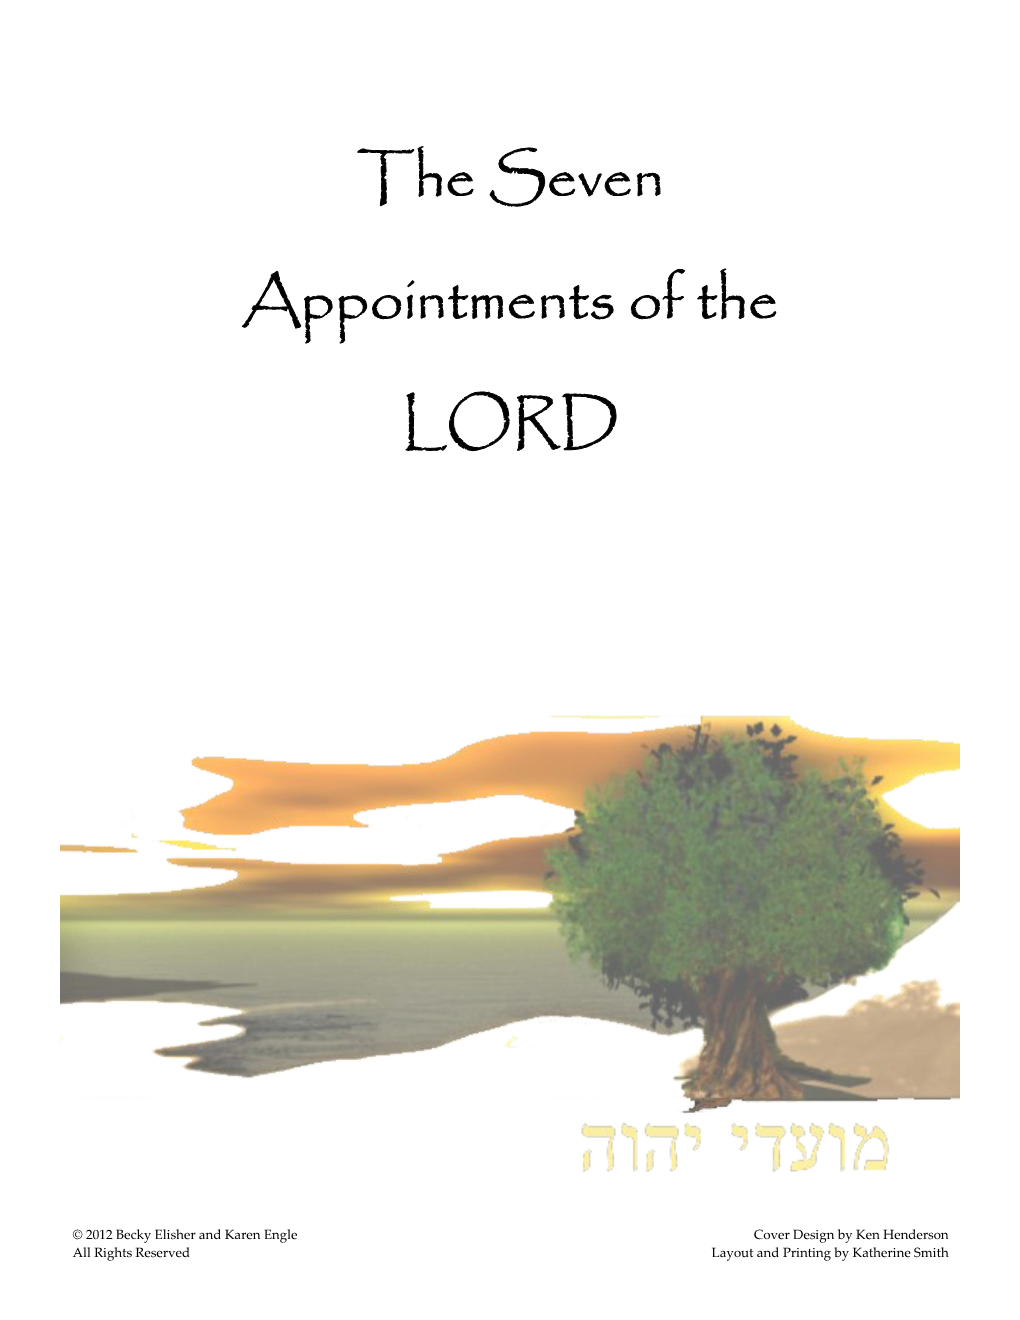 The Seven Appointments of the Lord